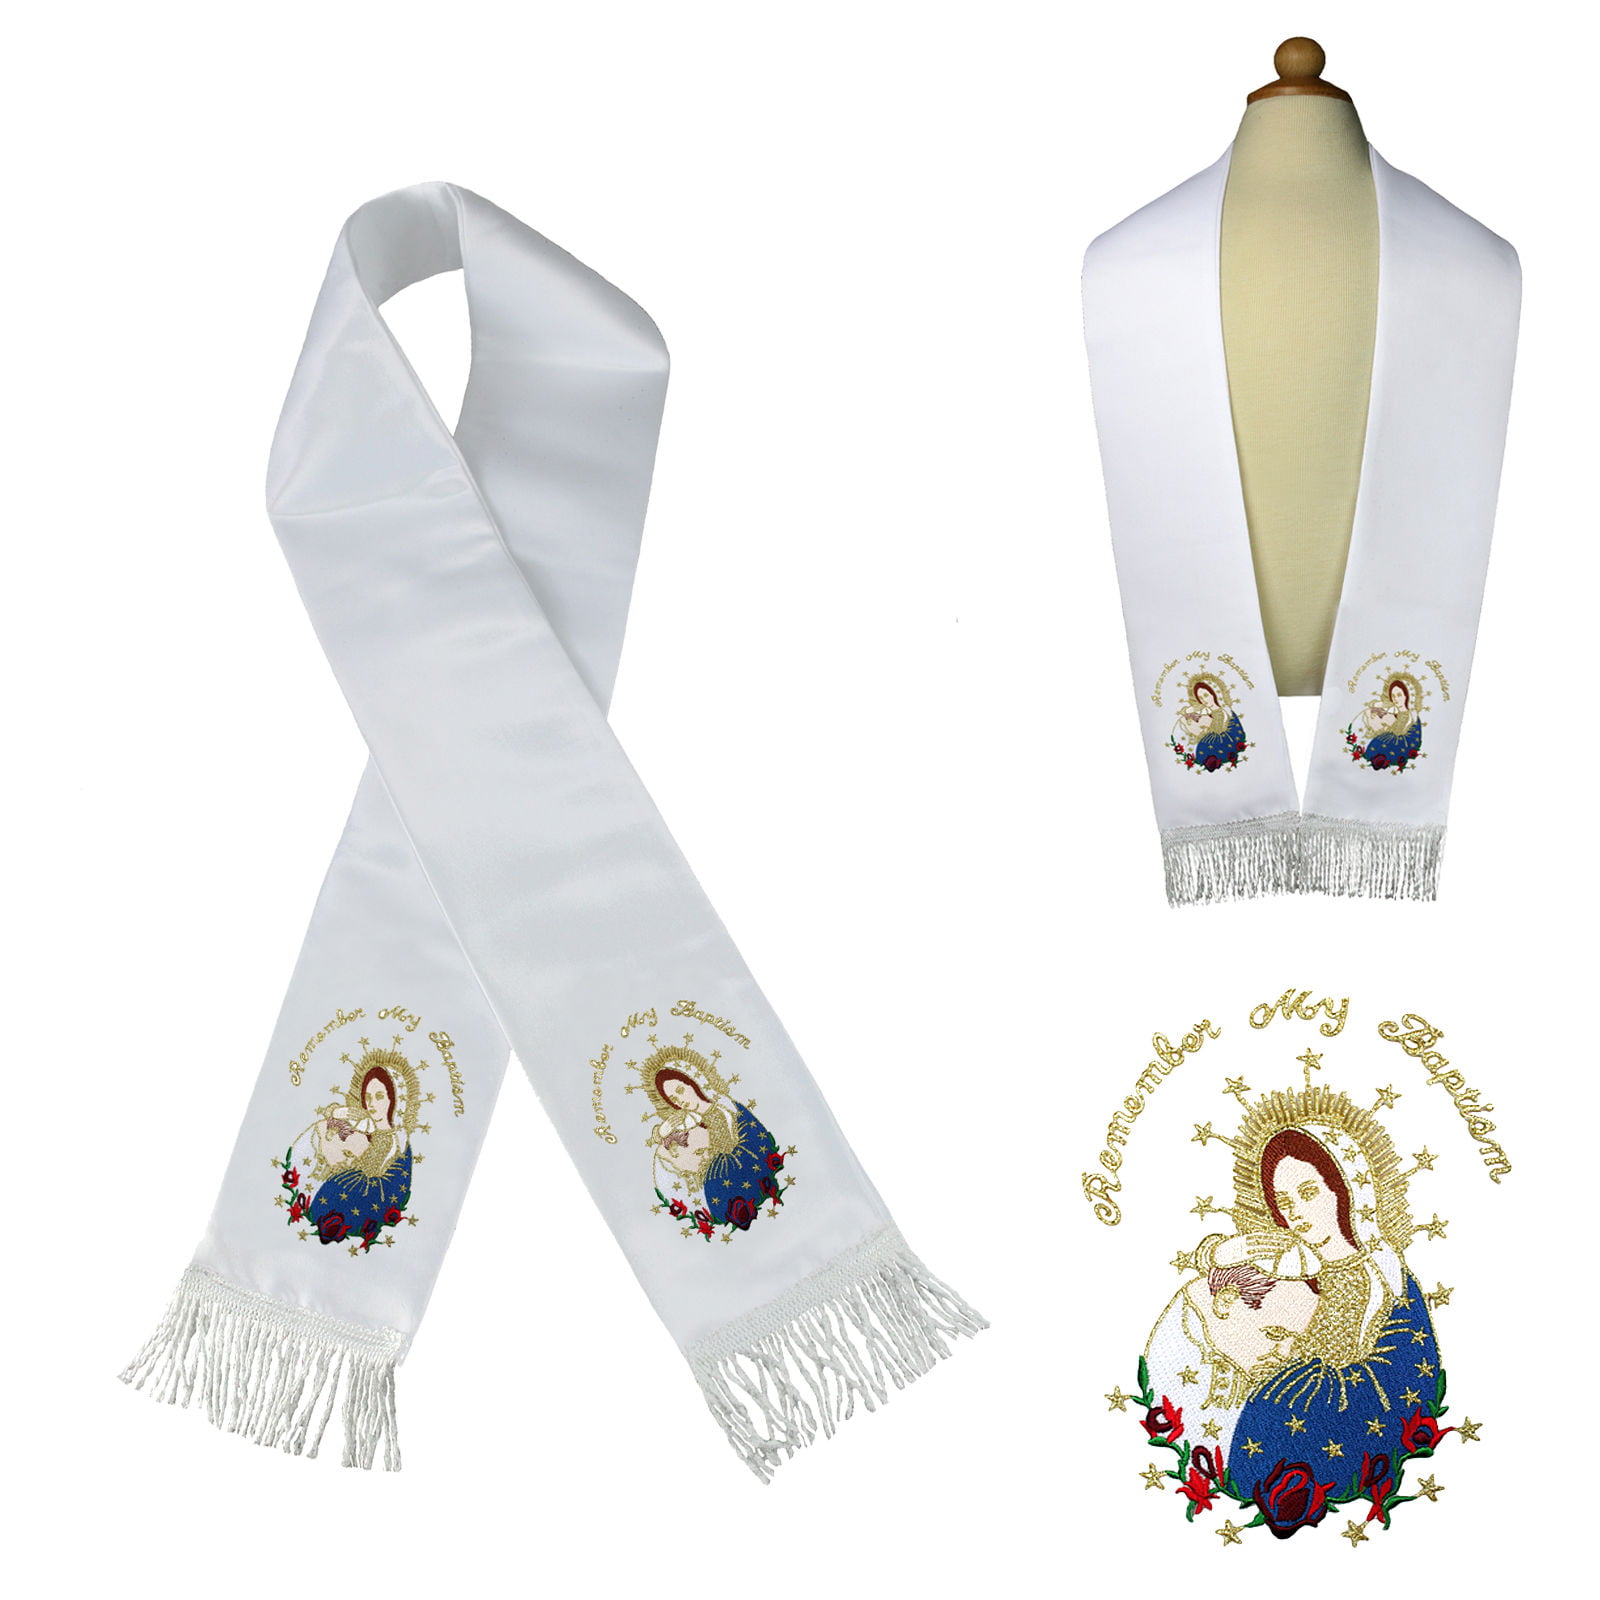 Metallic Embroidered Christening Baptism Stole Scarf Sash Virgin Mary Pope Maria